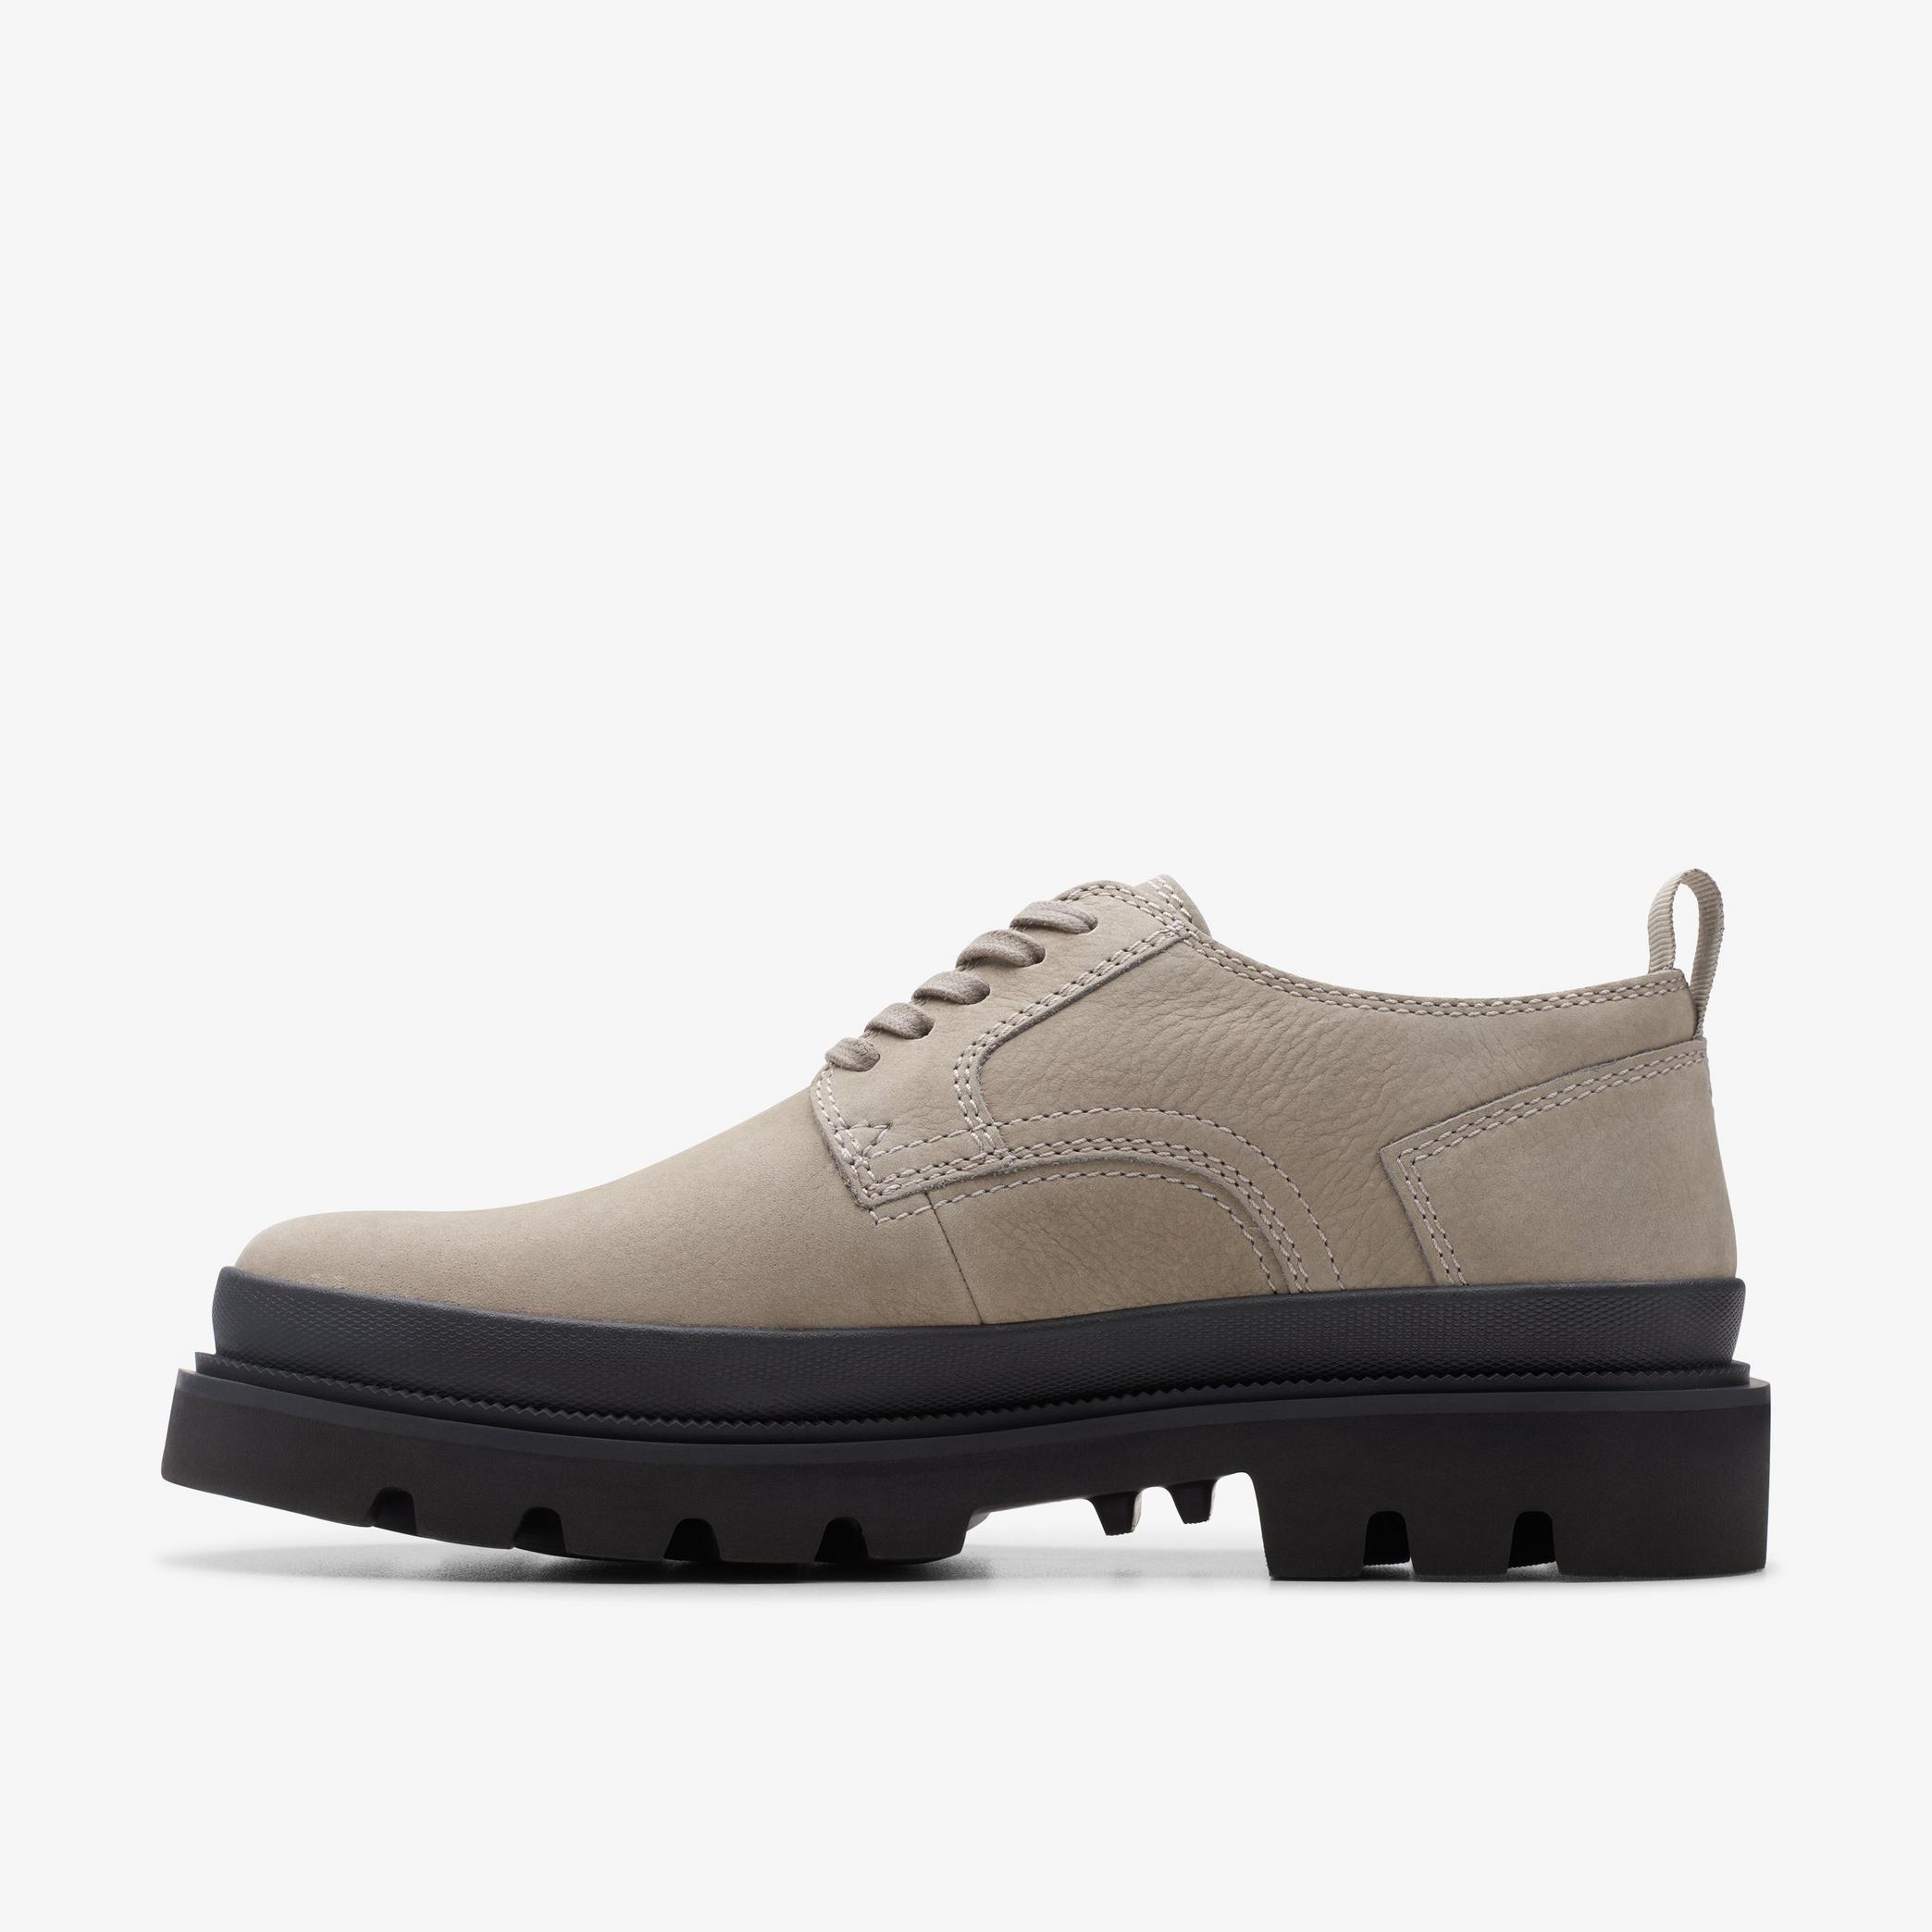 Badell Lace Grey Nubuck Oxford Shoes, view 2 of 6